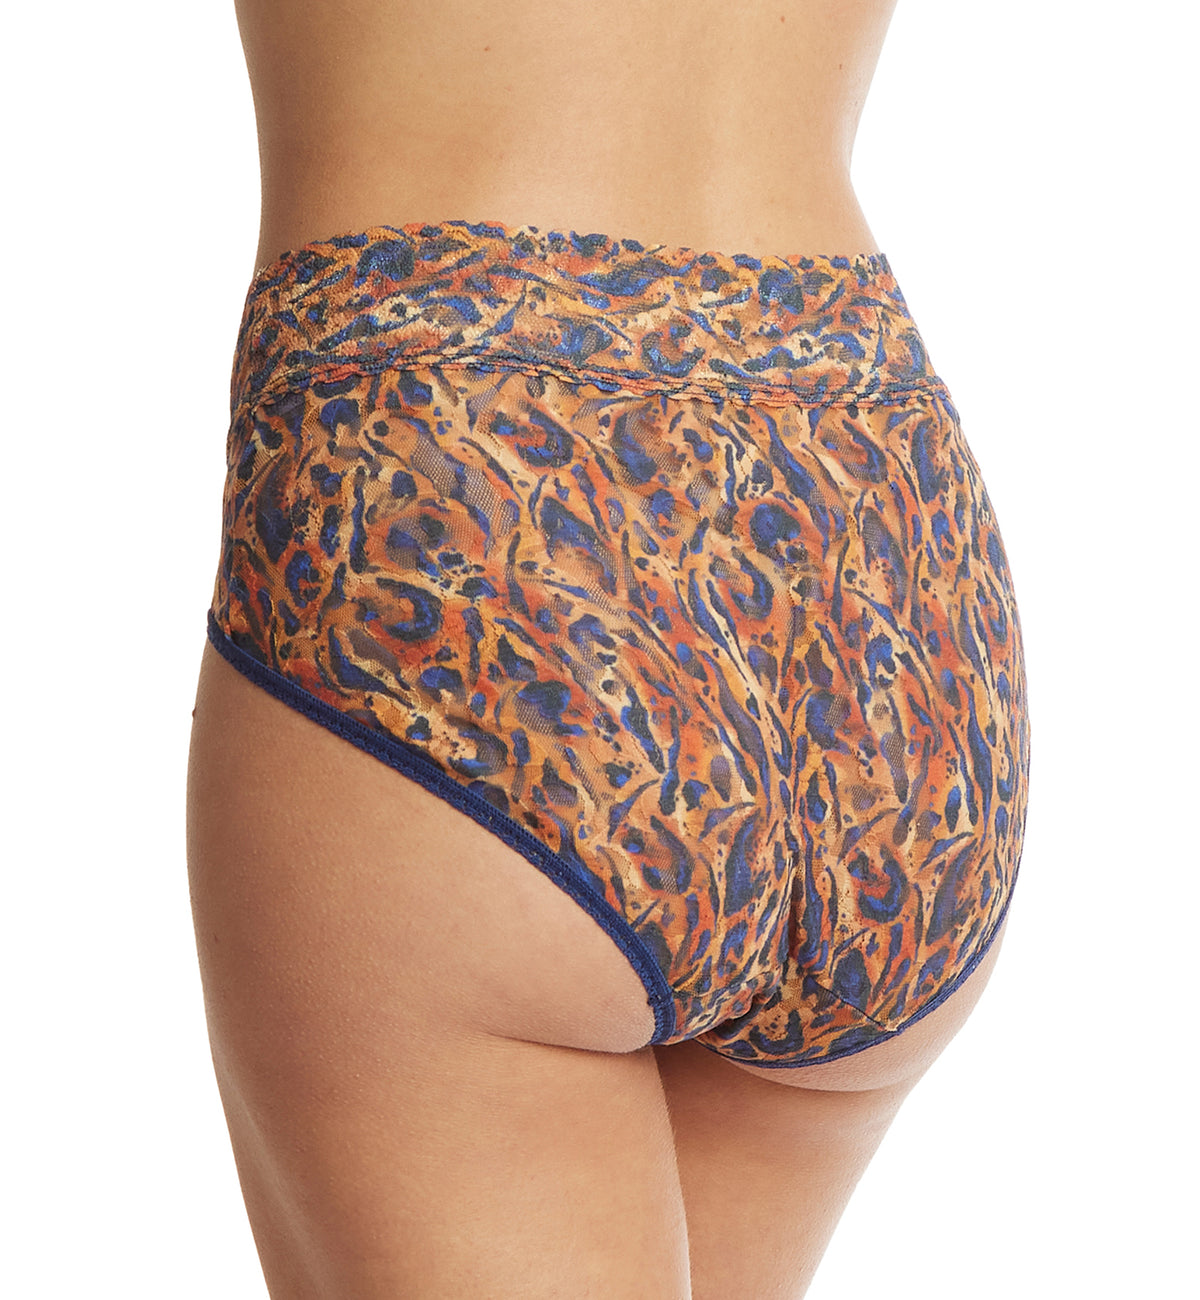 Hanky Panky Signature Lace Printed French Brief (PR461),Small,Wild About Blue - Wild About Blue,Small